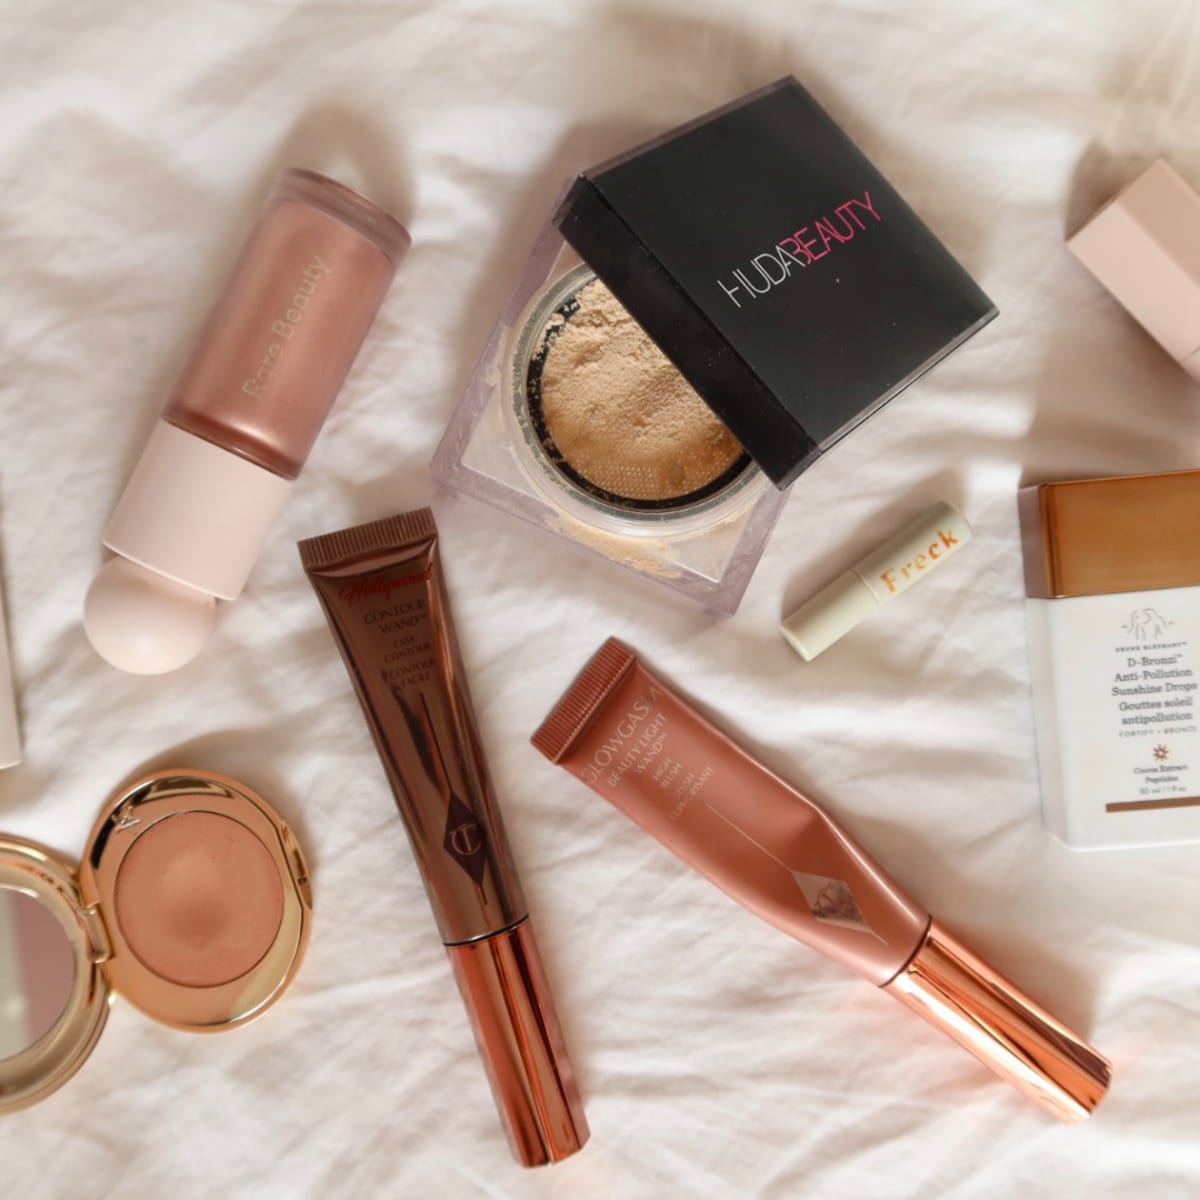 TikTok viral beauty products: What's worth buying?